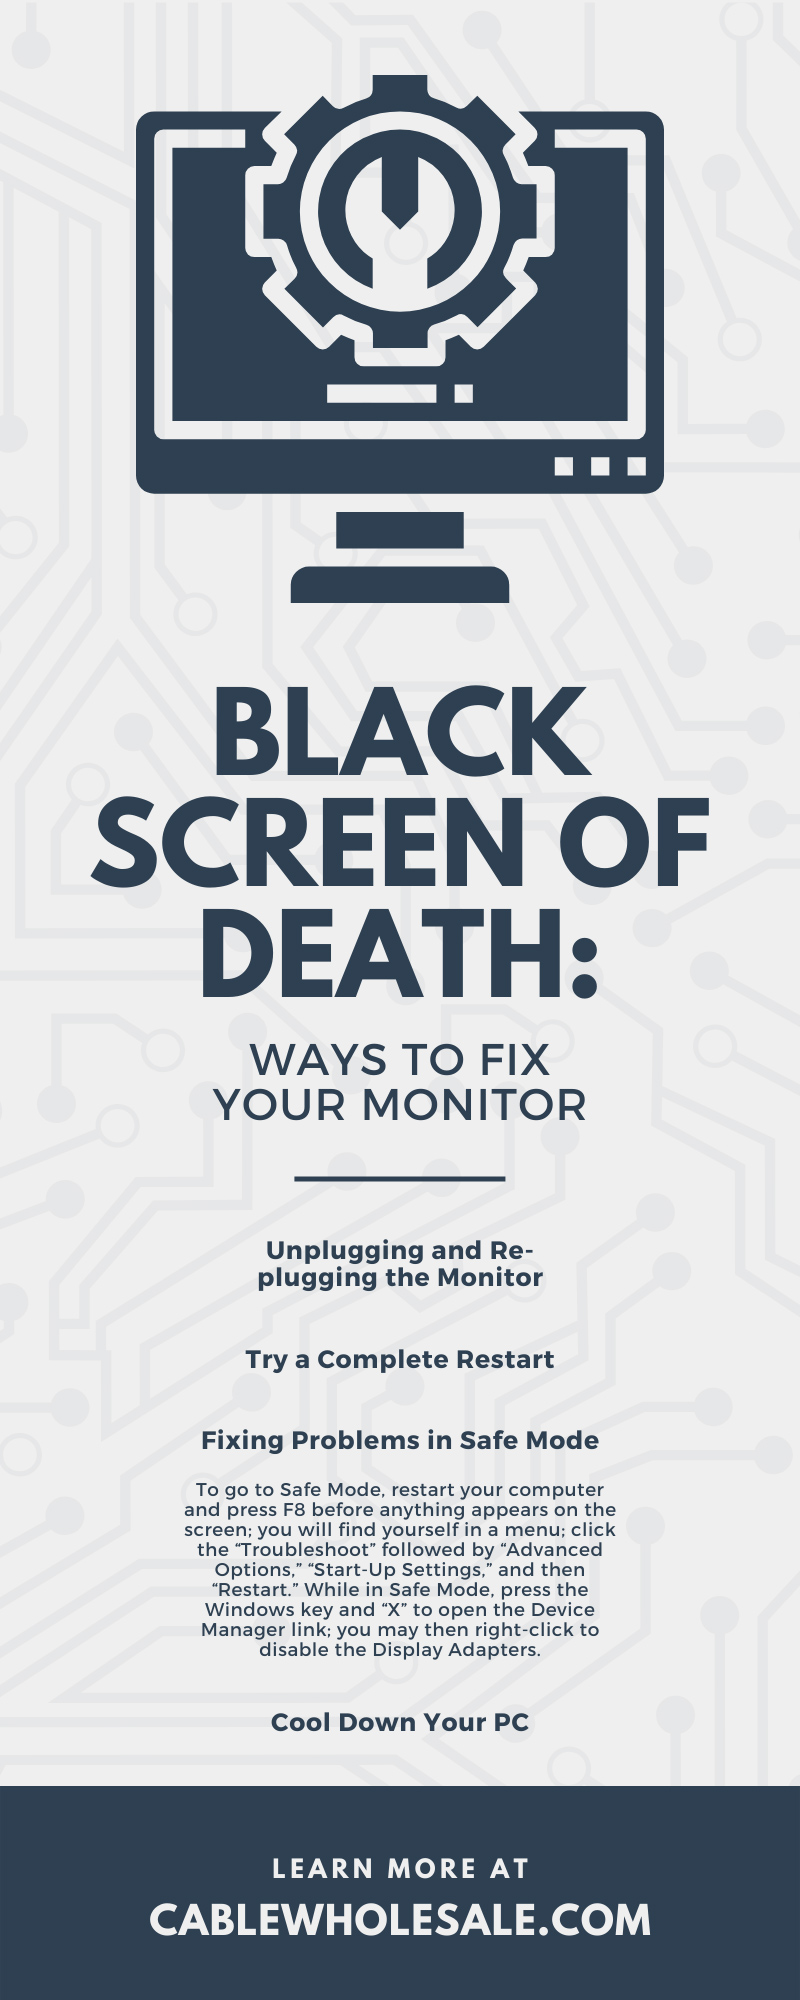 Black Screen of Death: Ways To Fix Your Monitor